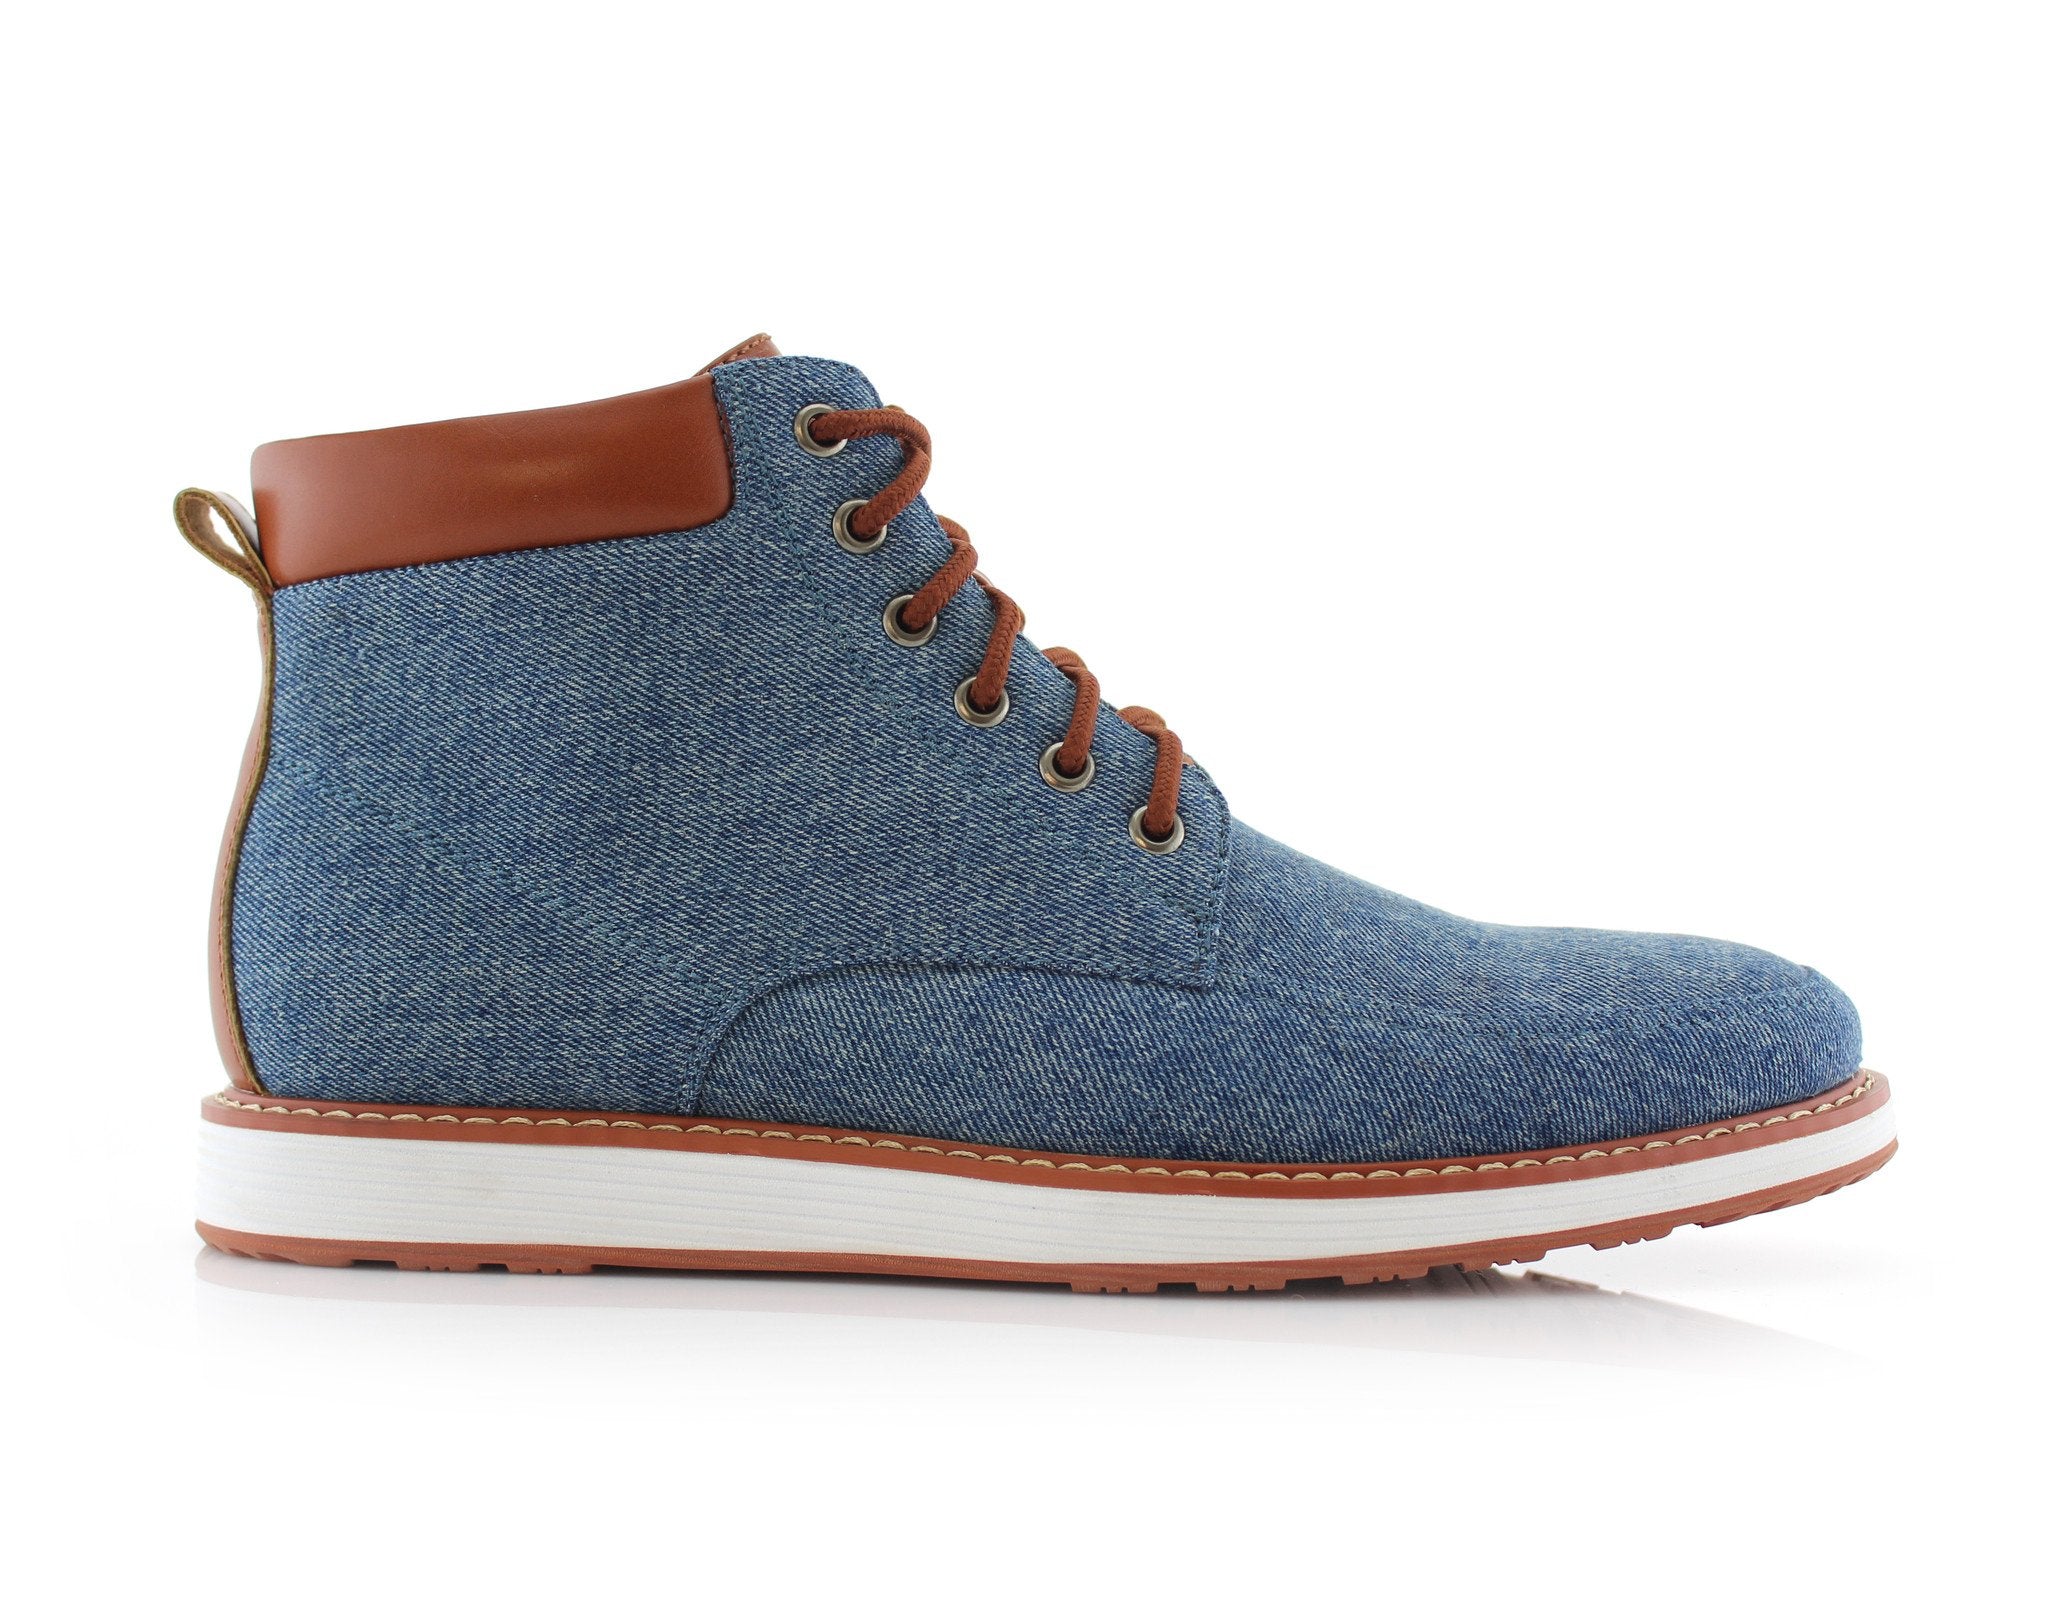 Two-Toned Sneaker Boots | Melvin by Ferro Aldo | Conal Footwear | Outer Side Angle View